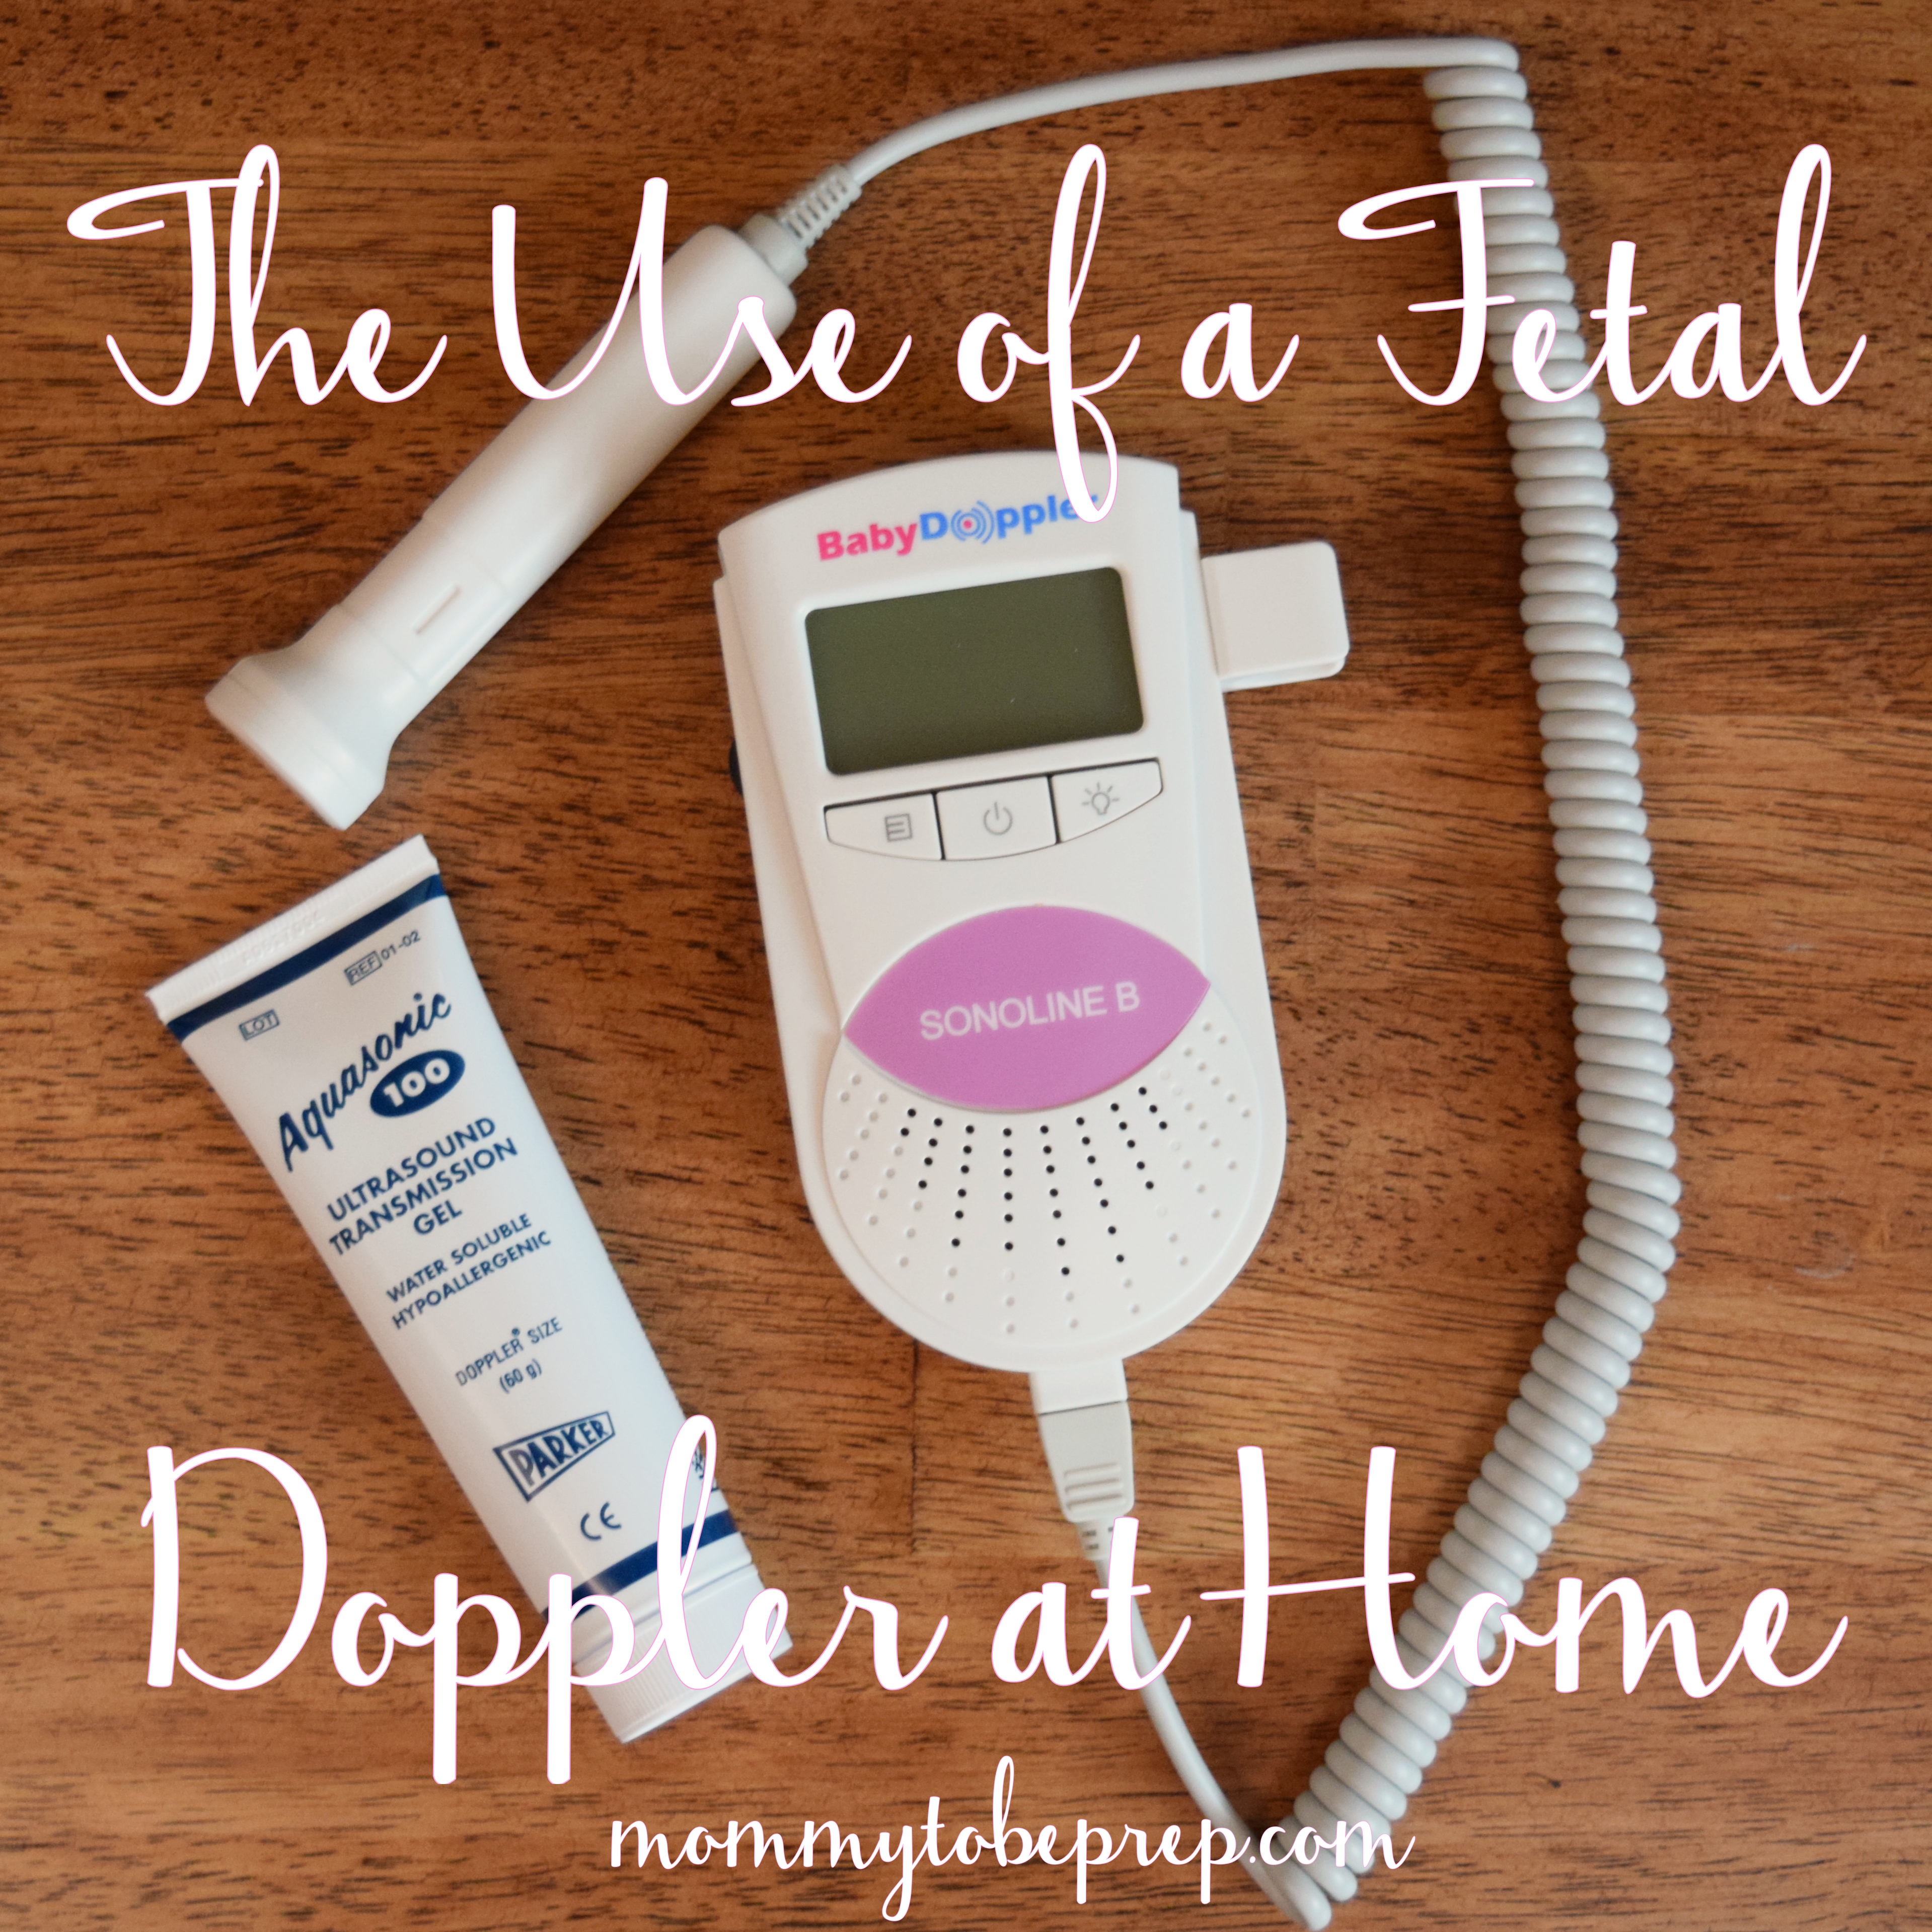 The Use of a Fetal Doppler at Home